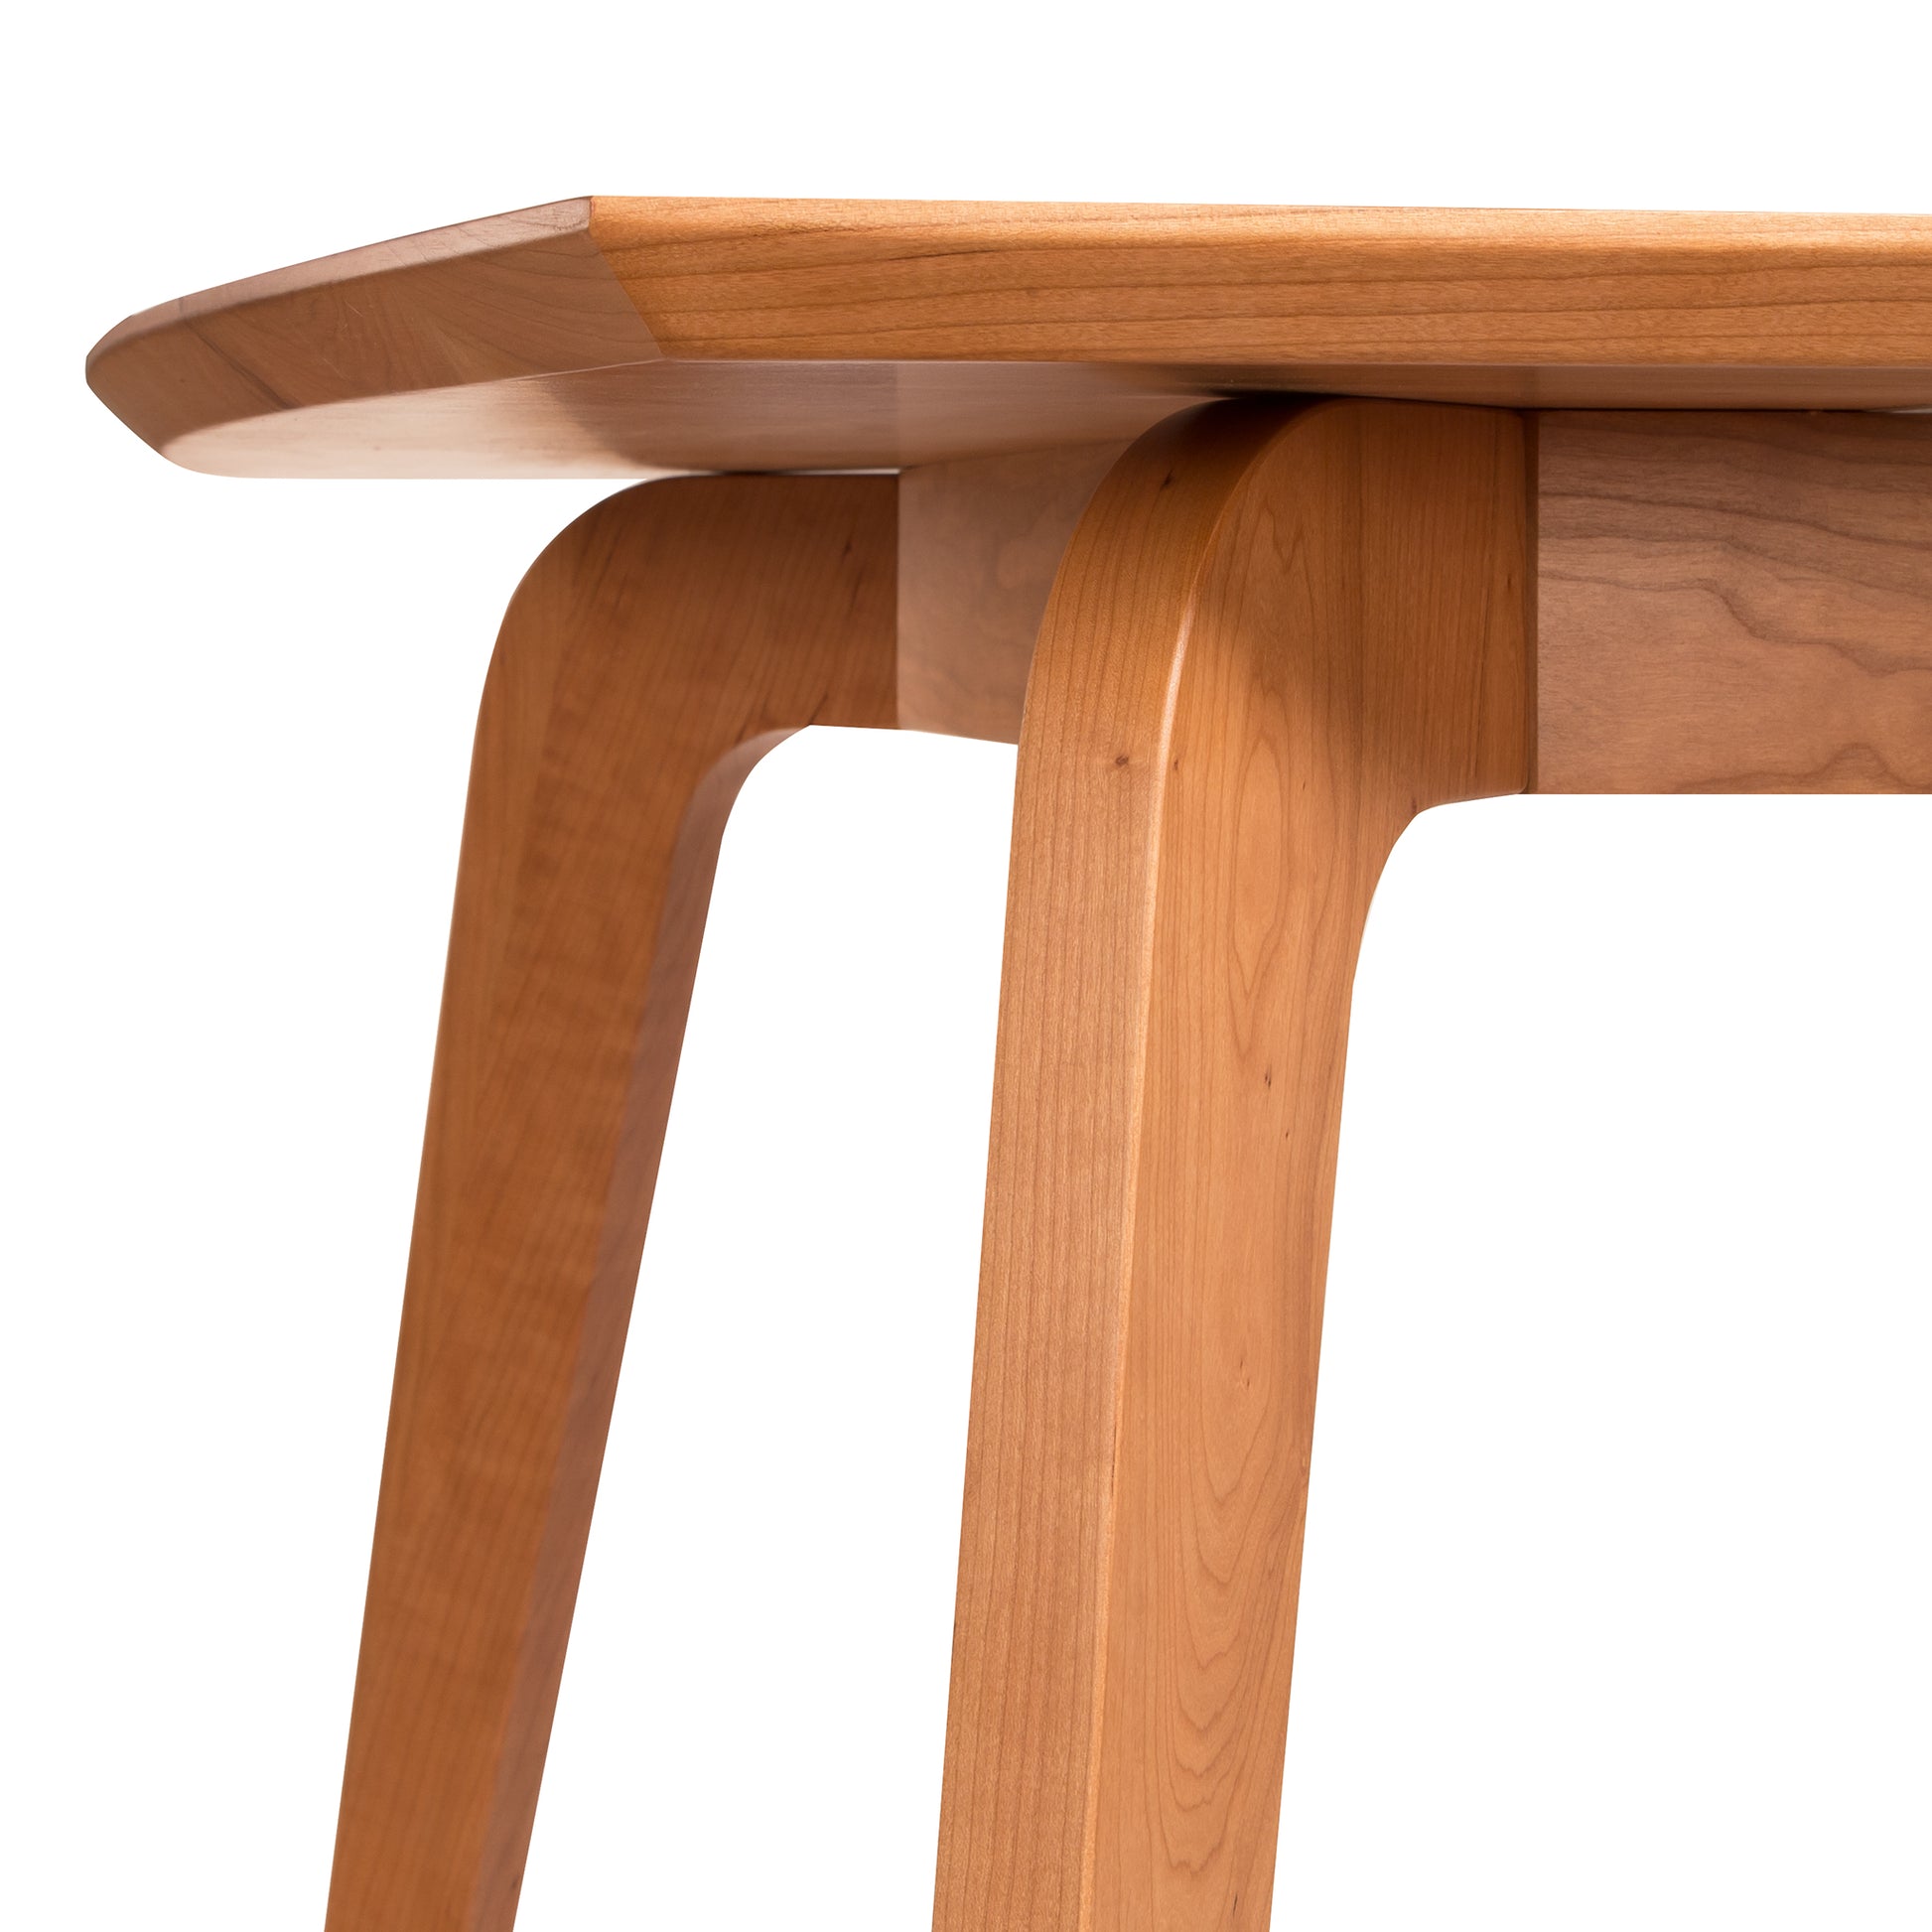 A close-up view of the Lyndon Furniture Brighton Solid-Top Dining Table featuring solid wood construction, a smooth tabletop, and elegantly curved legs, with a focus on its natural wood grain and craftsmanship.